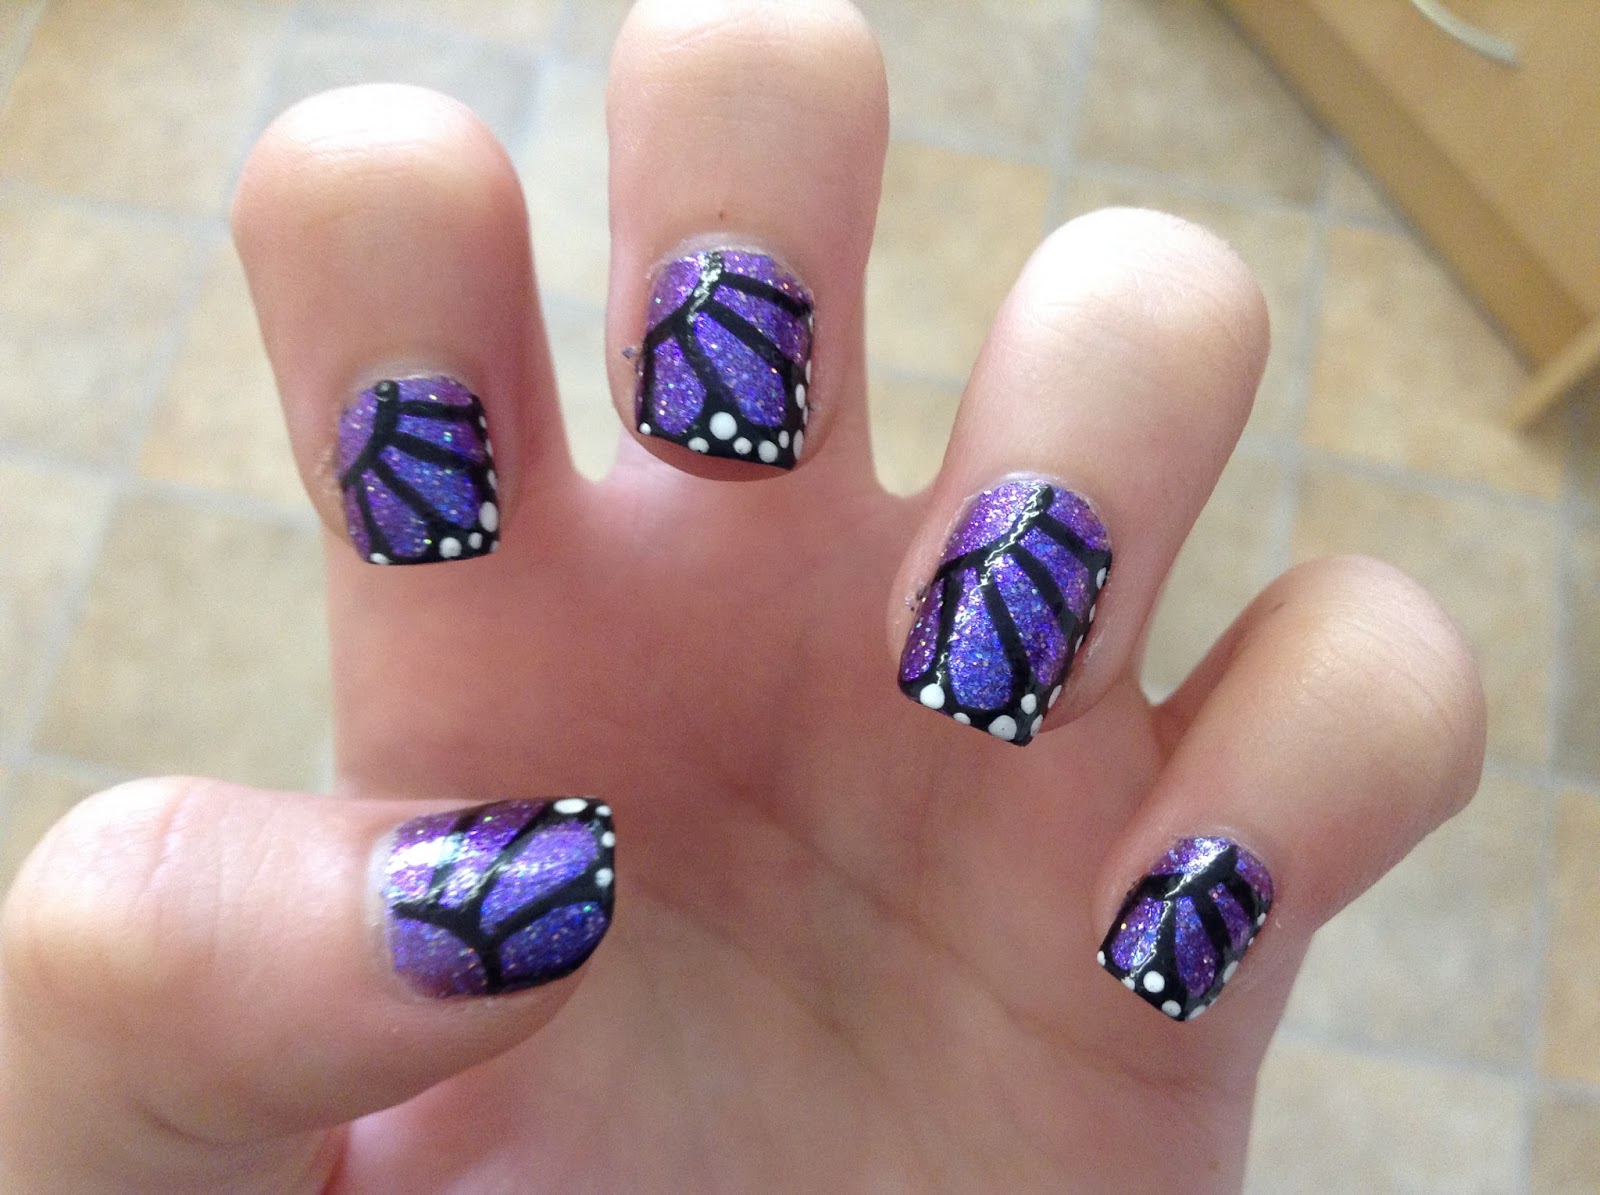 2. Summer Butterfly Nail Designs - wide 5